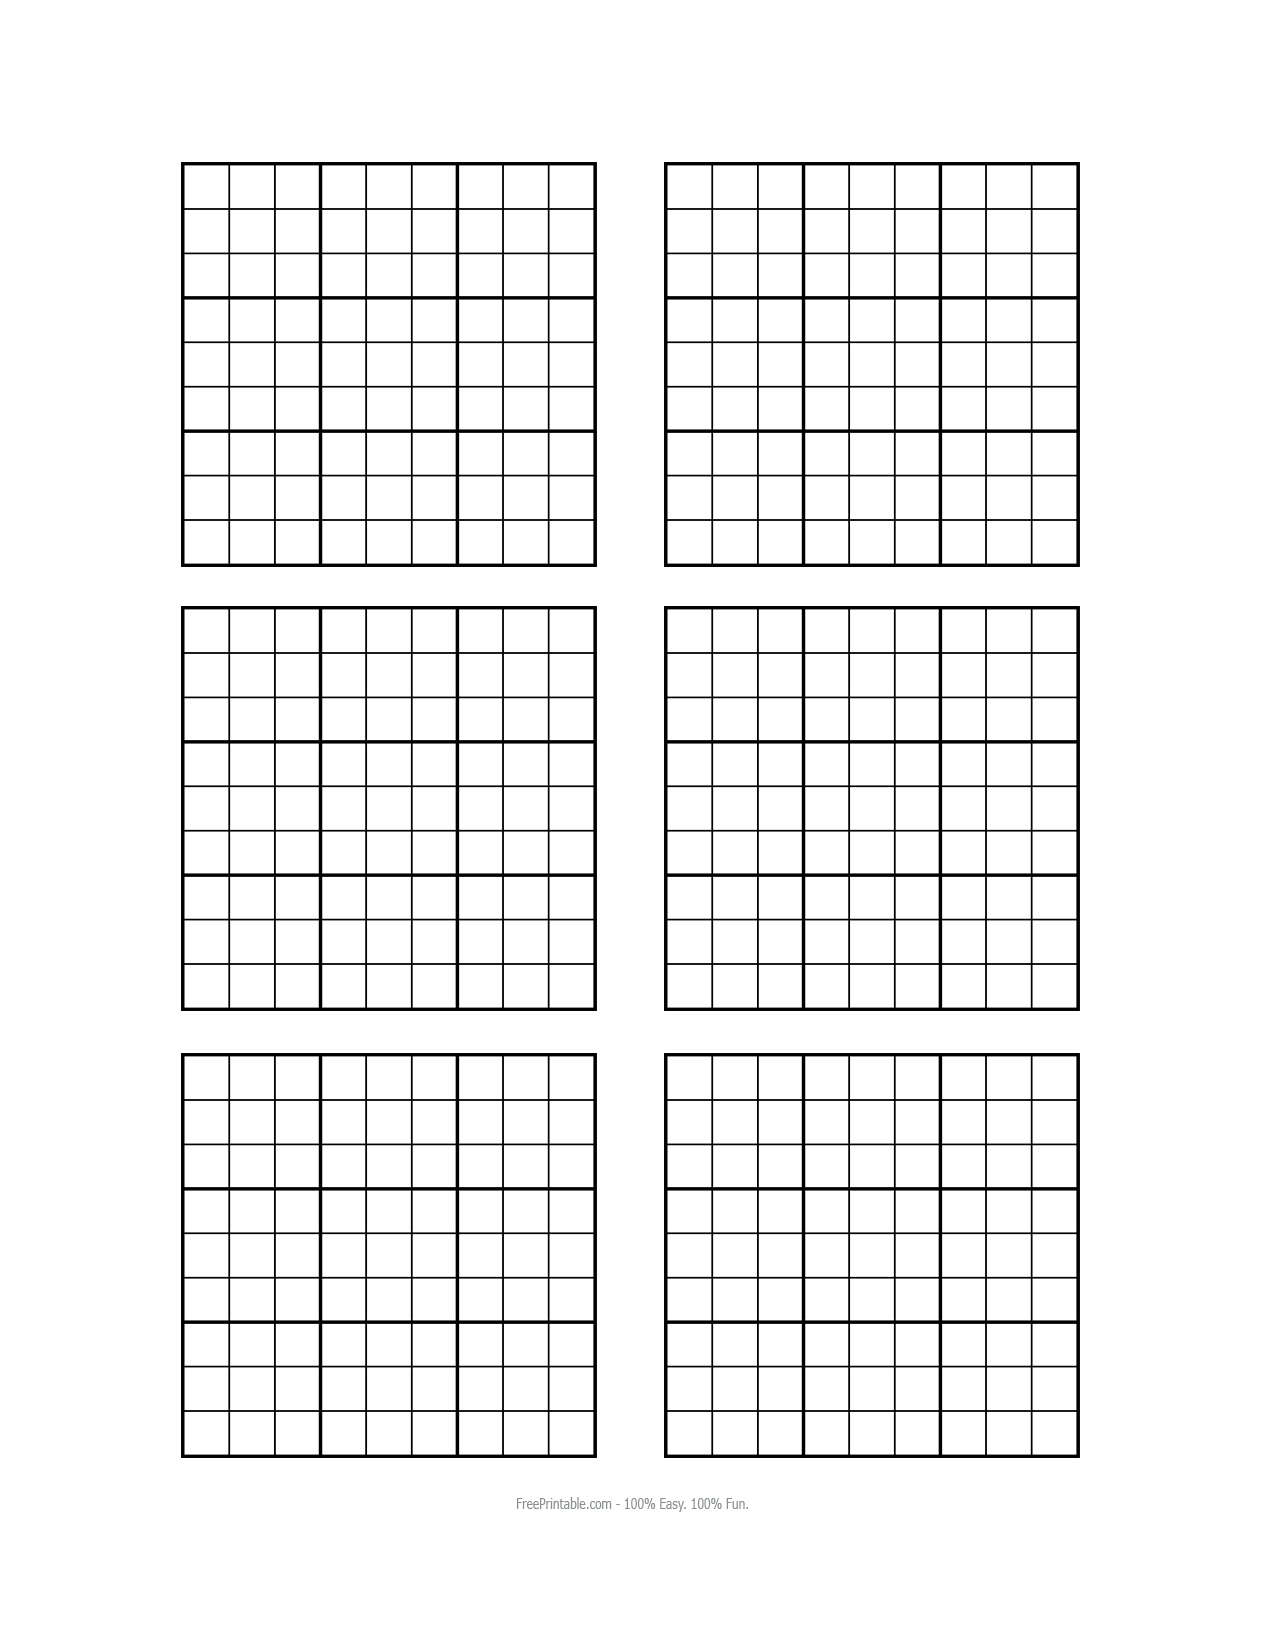 Blank Sudoku Grids To Print White Gold